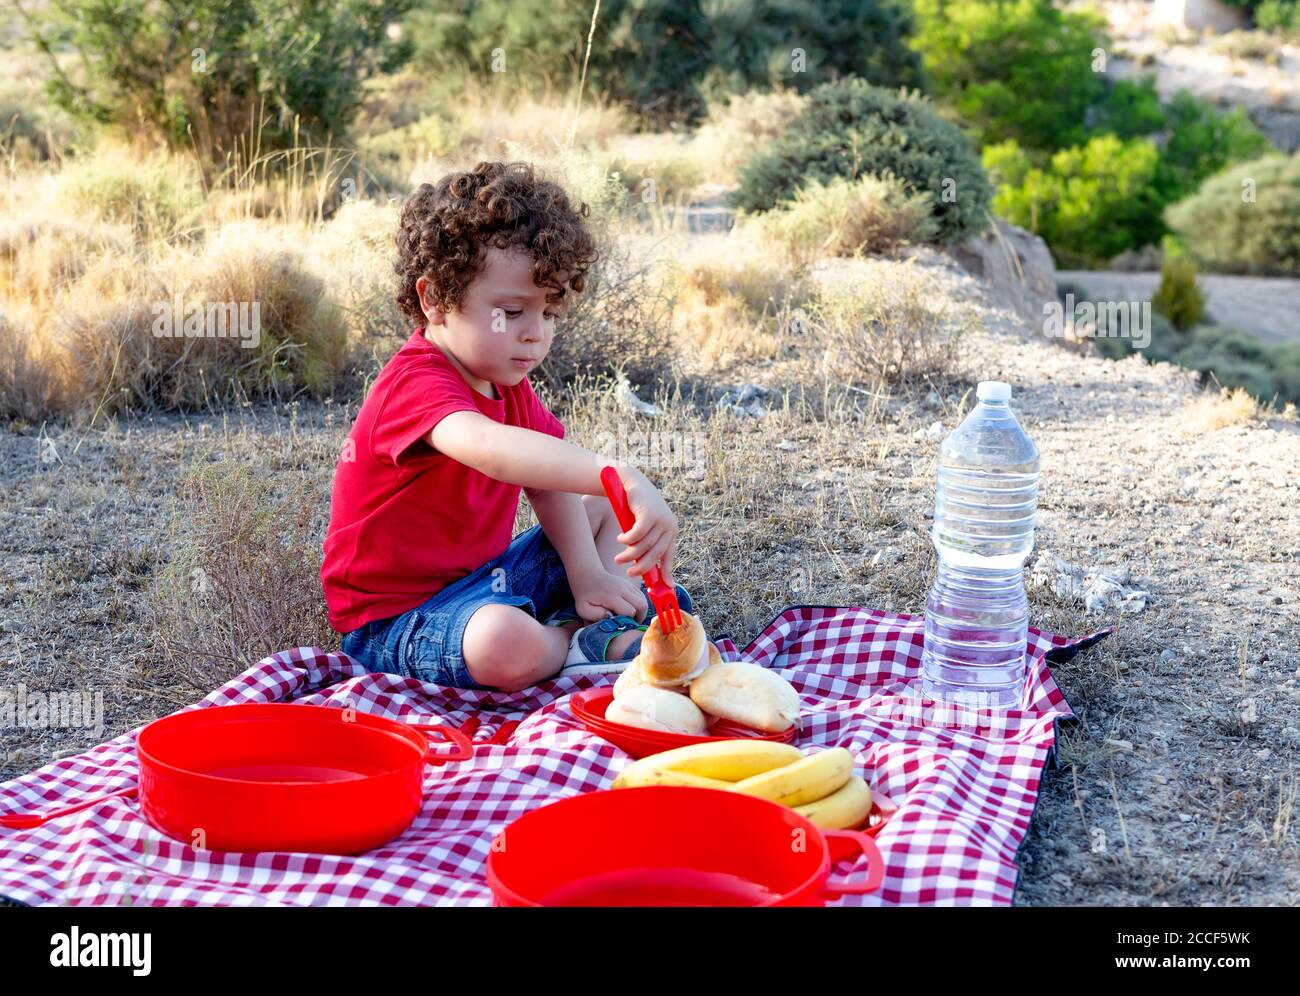 boy on picnic prodding a sandwich with a red fork, red and black checkered tablecloth and reusable plates, Stock Photo